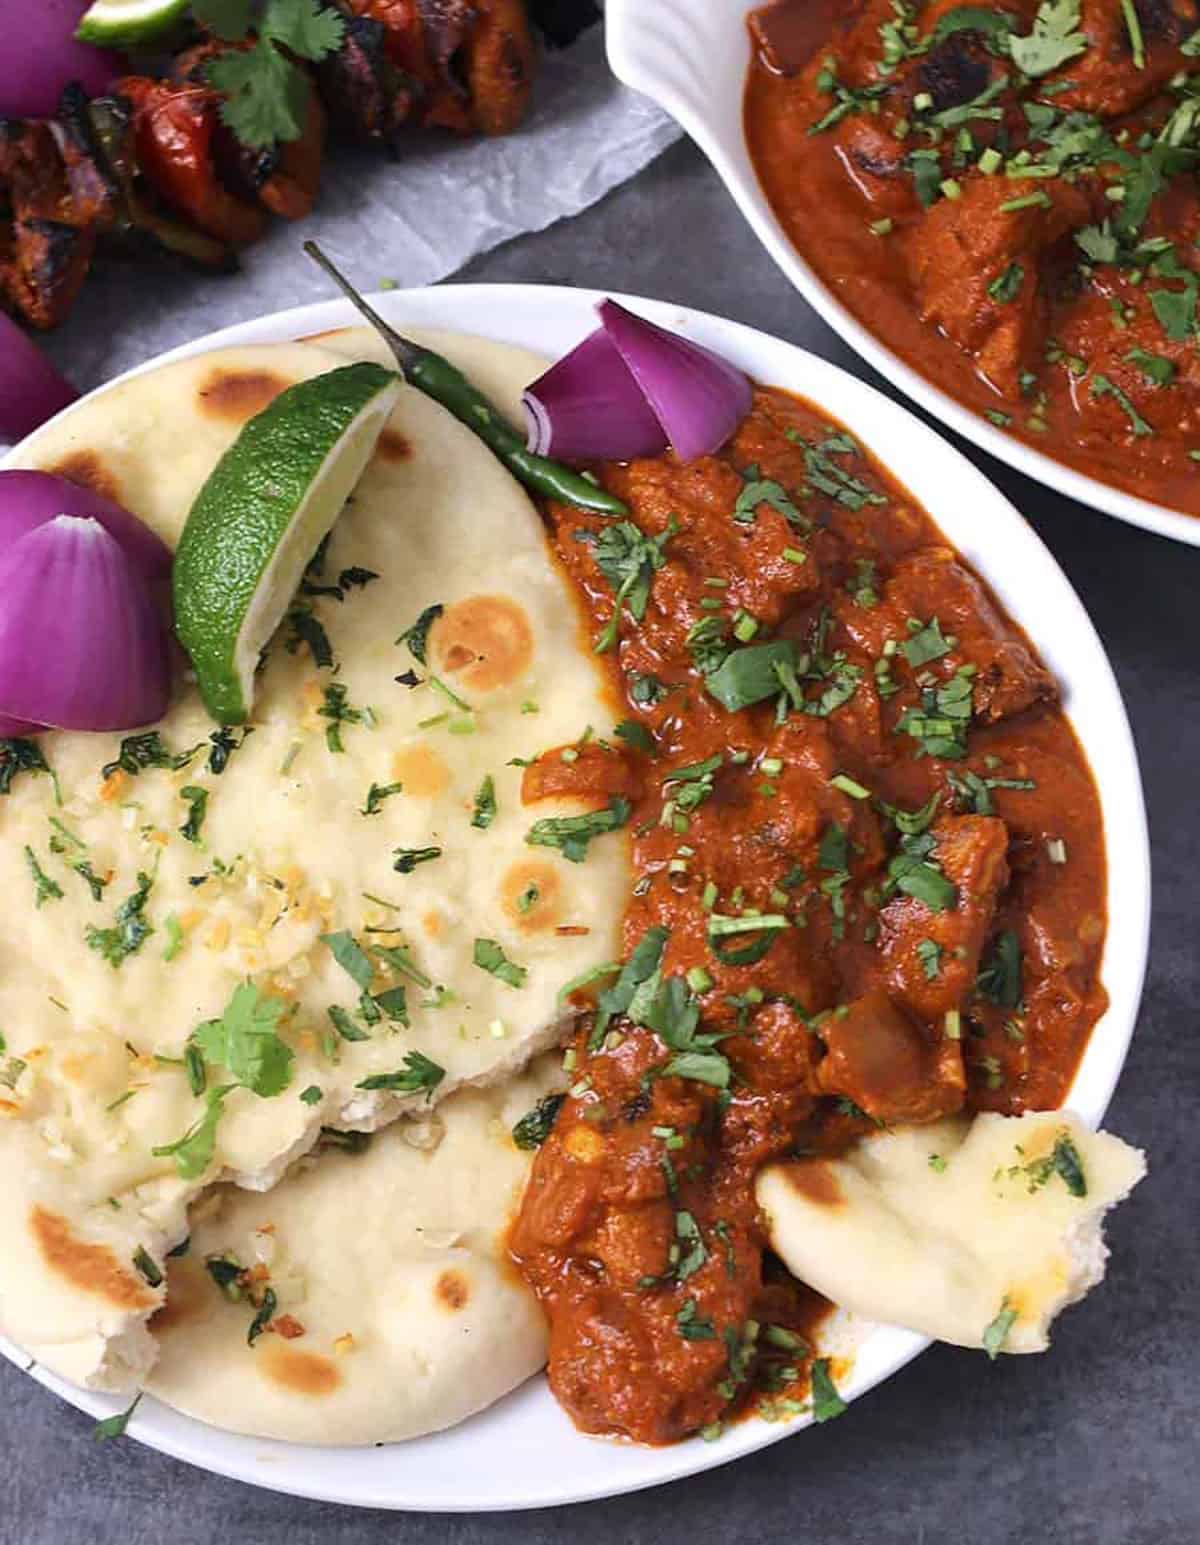 Chicken tikka masala prepared in an Instant Pot served in a white plate along with naan bread, red onion slices and a lemon wedge.